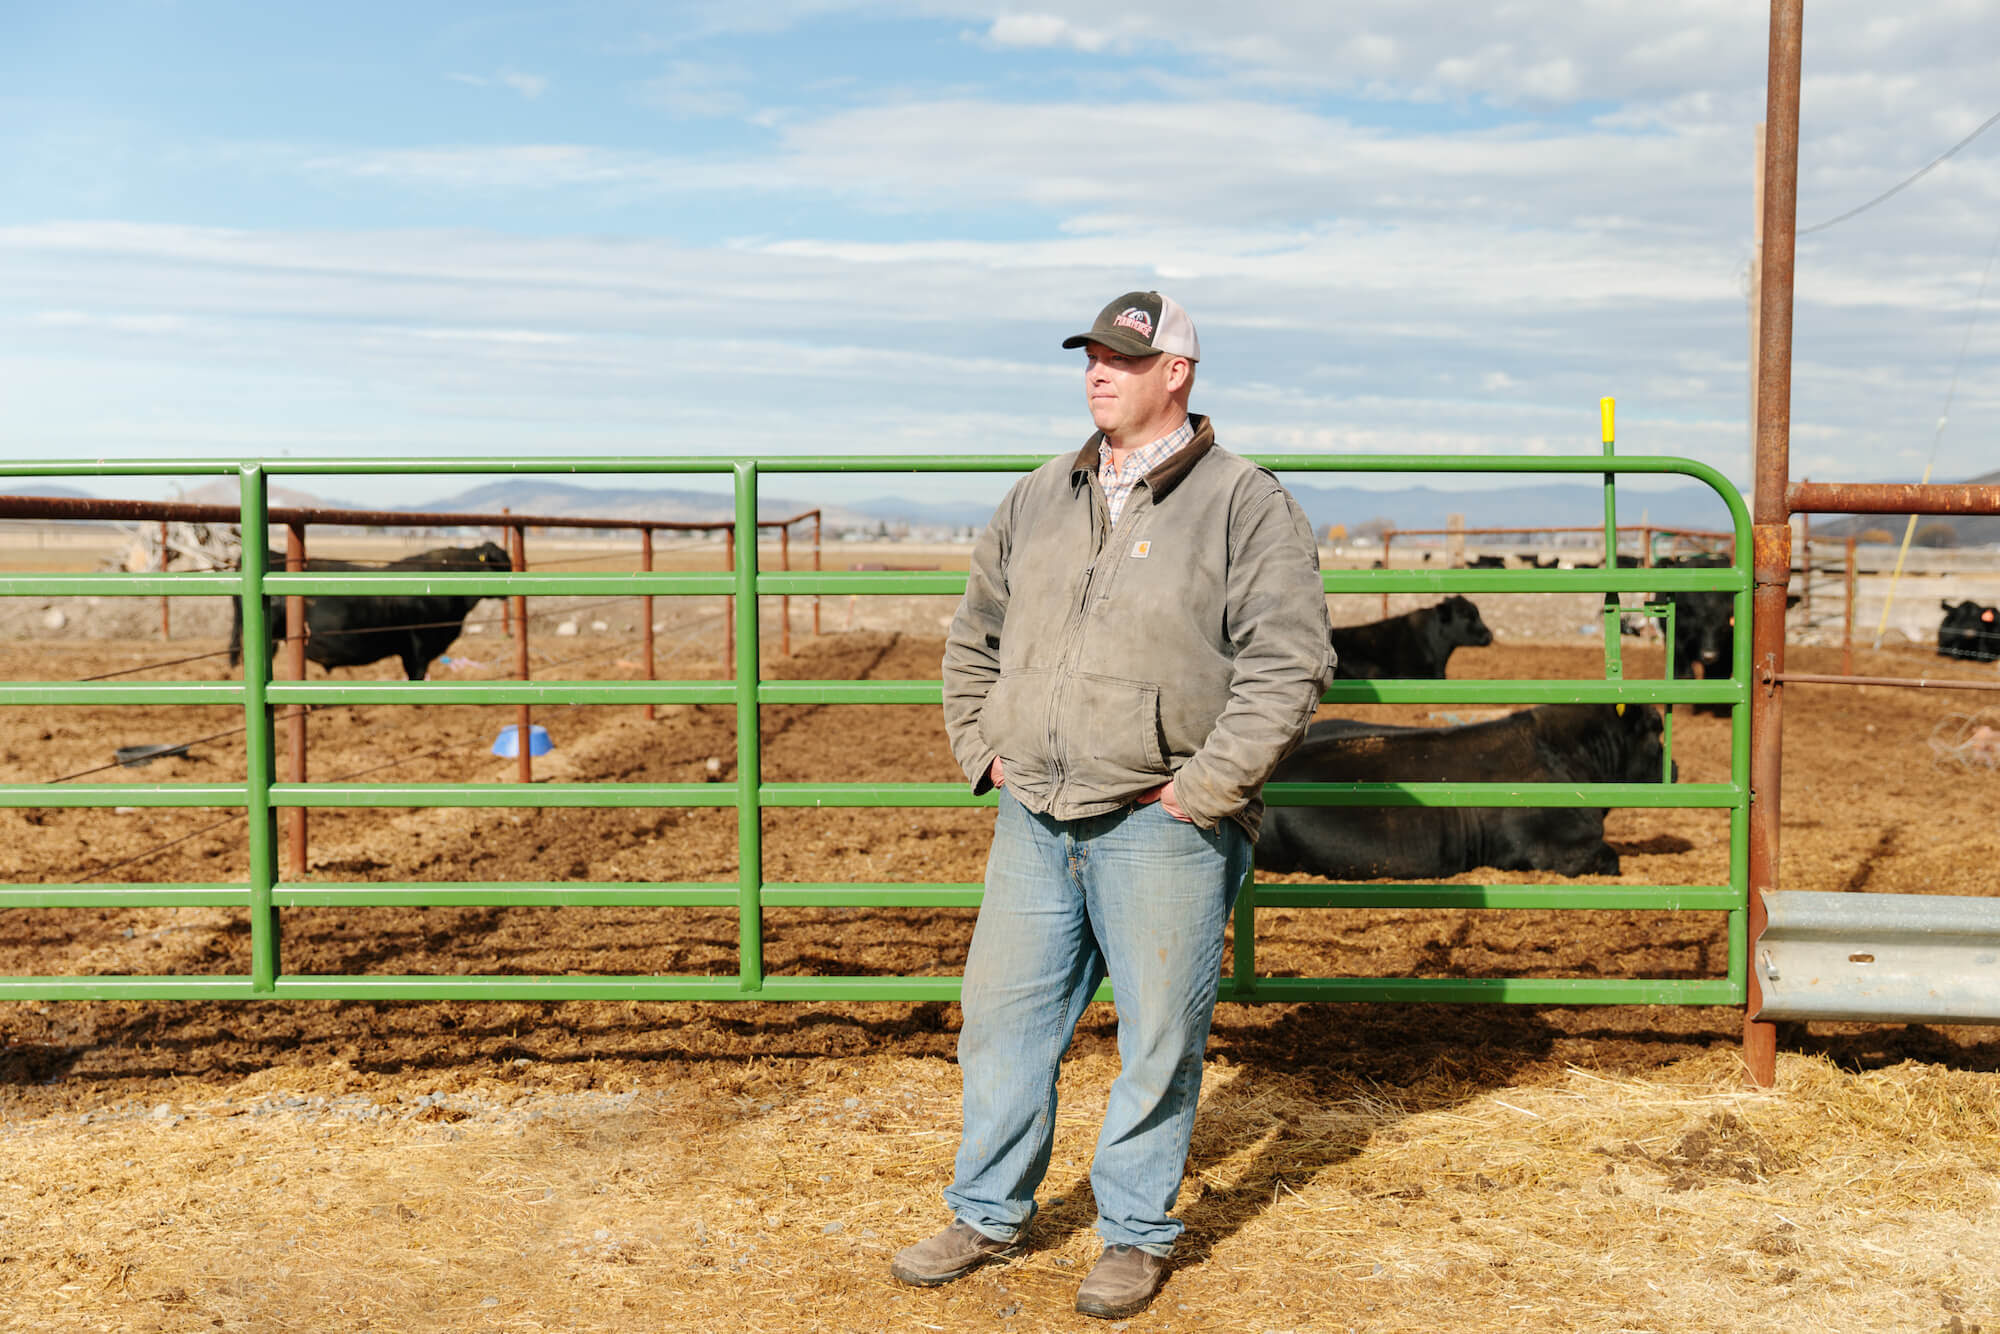 Ty Kliewer stands on ranch in front of cows behind a green fence, Klamath, OR 112221